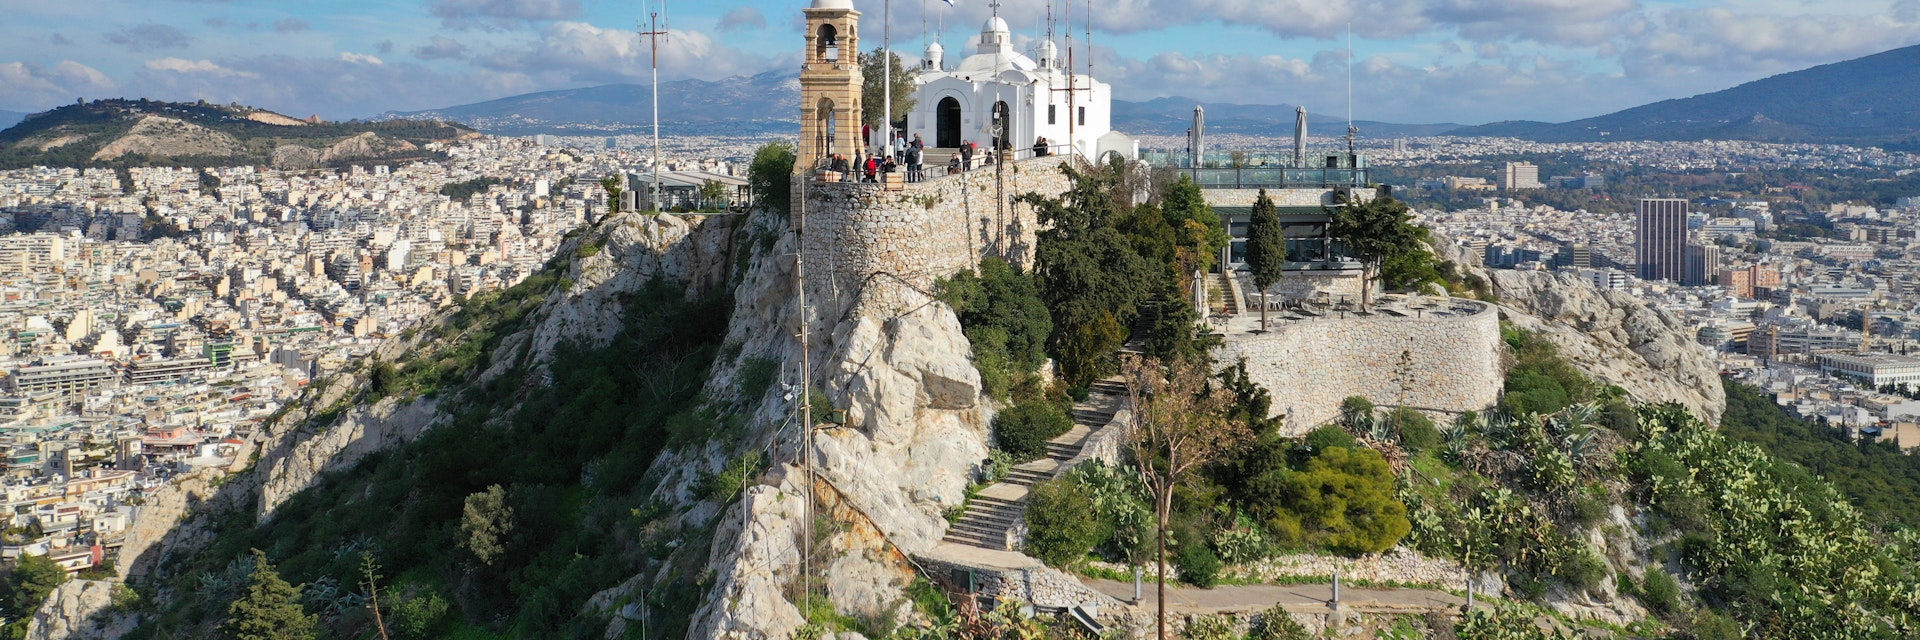 Aerial drone photo of iconic chapel of Saint George on top of Lycabettus hill with beautiful deep blue sky and clouds, Athens, Attica, Greece; Shutterstock ID 1614107947; your: Erin Lenczycki; gl: 65050; netsuite: Digital; full: POI
1614107947